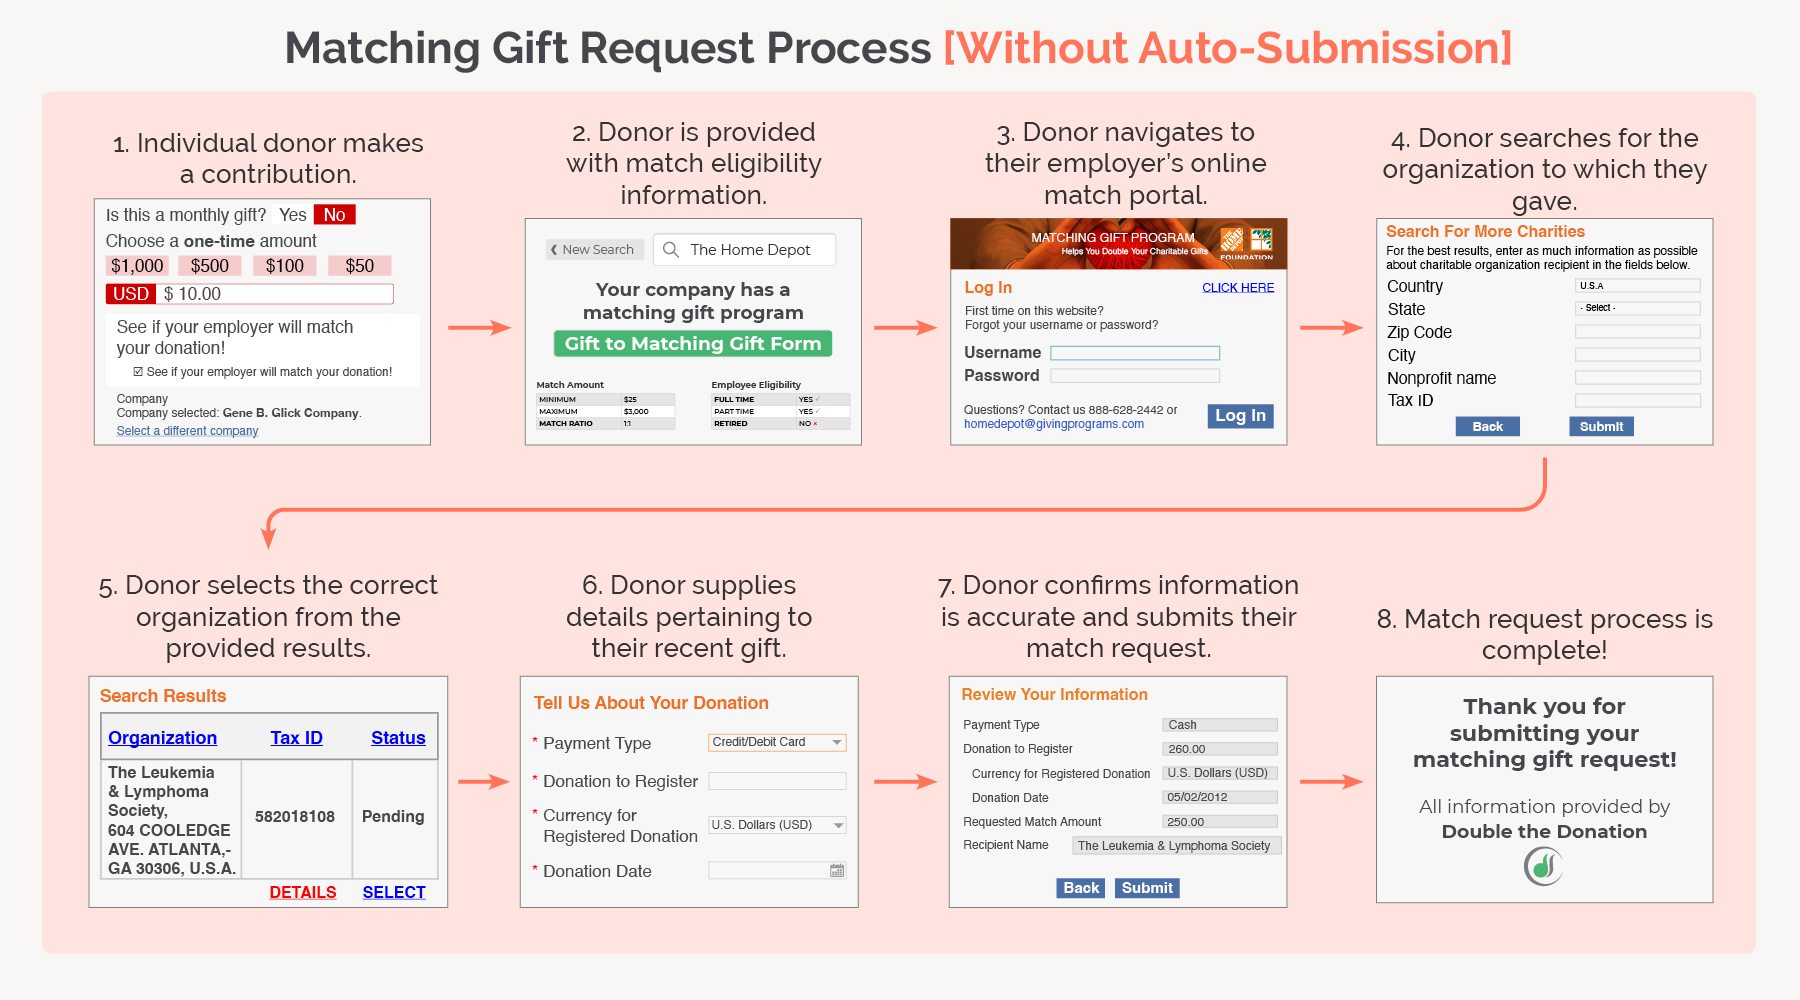 The image shows the matching gift process without auto-submission, written out below.